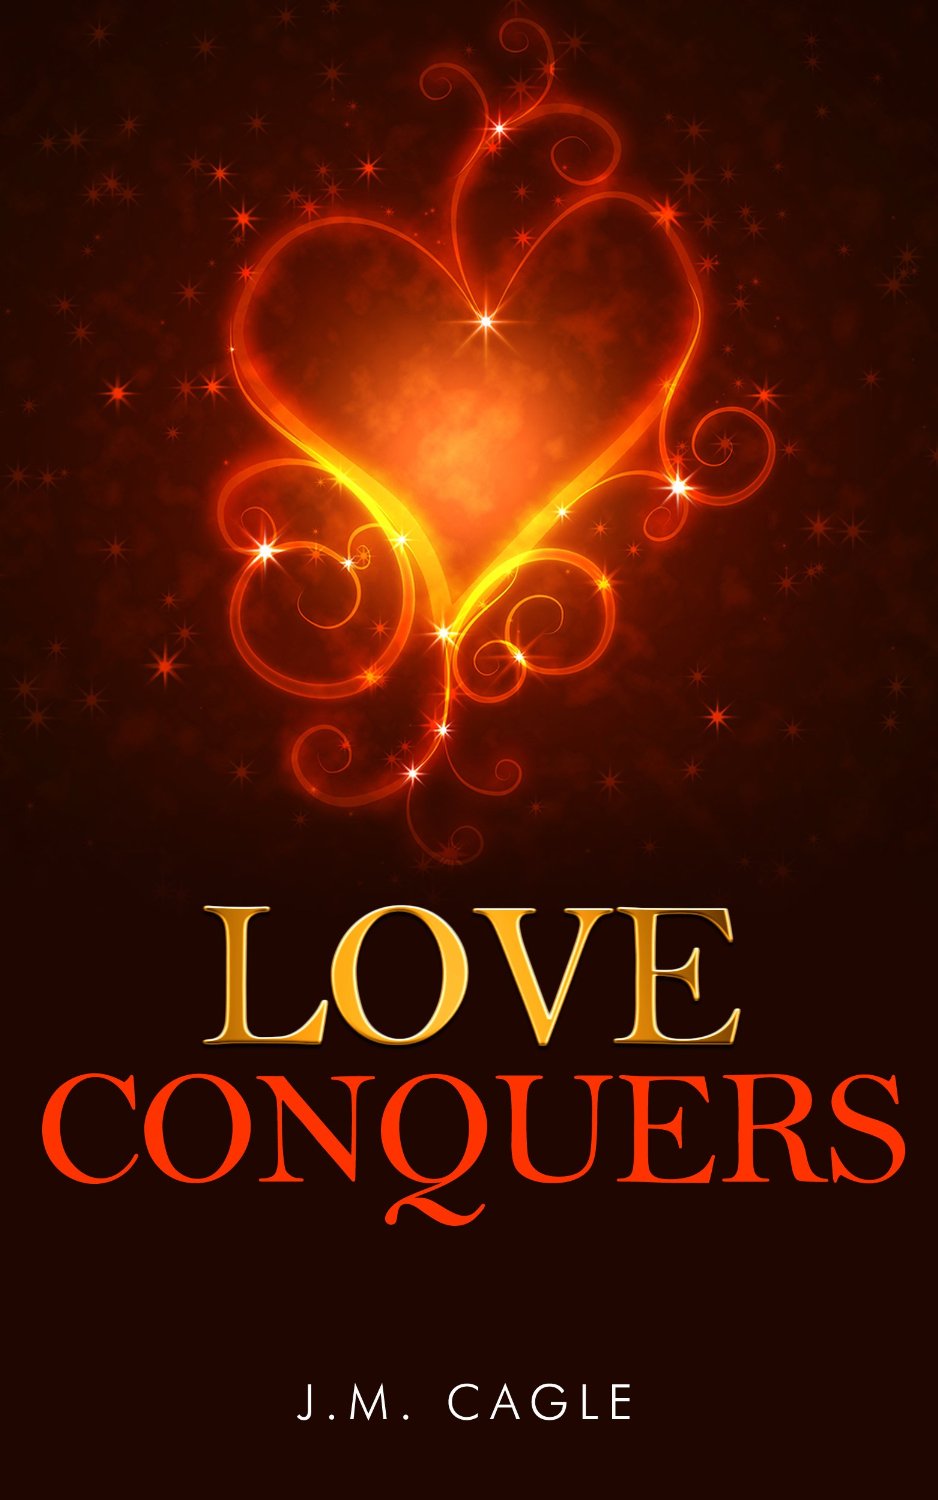 Love Conquers by J.M. Cagle